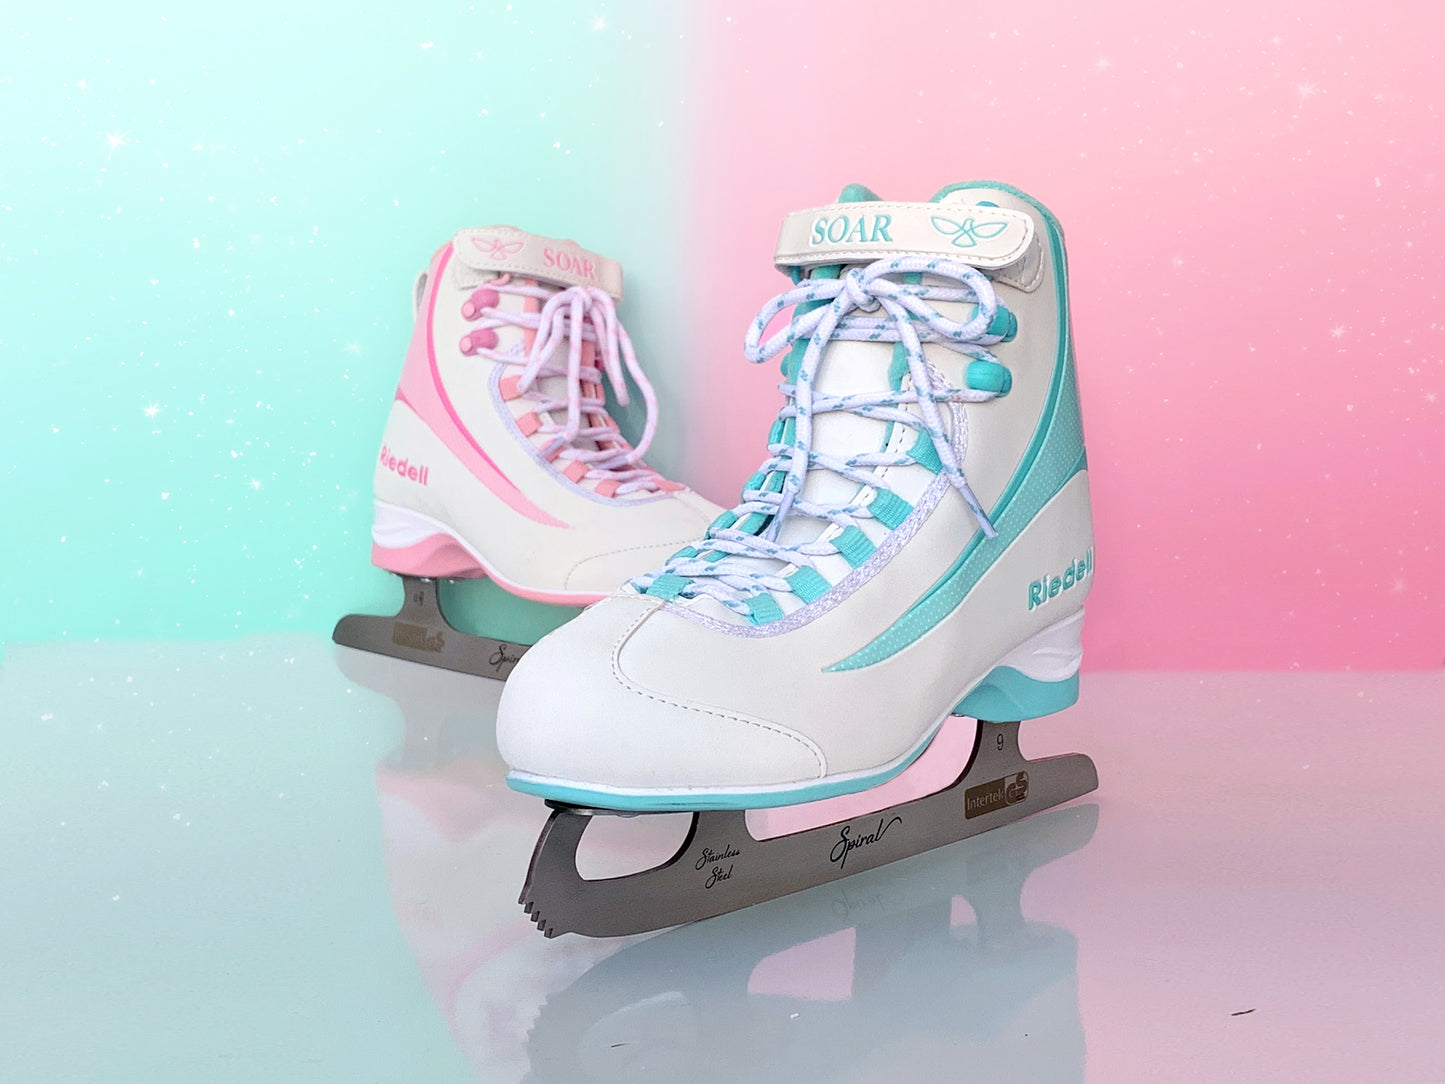 Riedell Soar Mint Skate with Spiral Blade